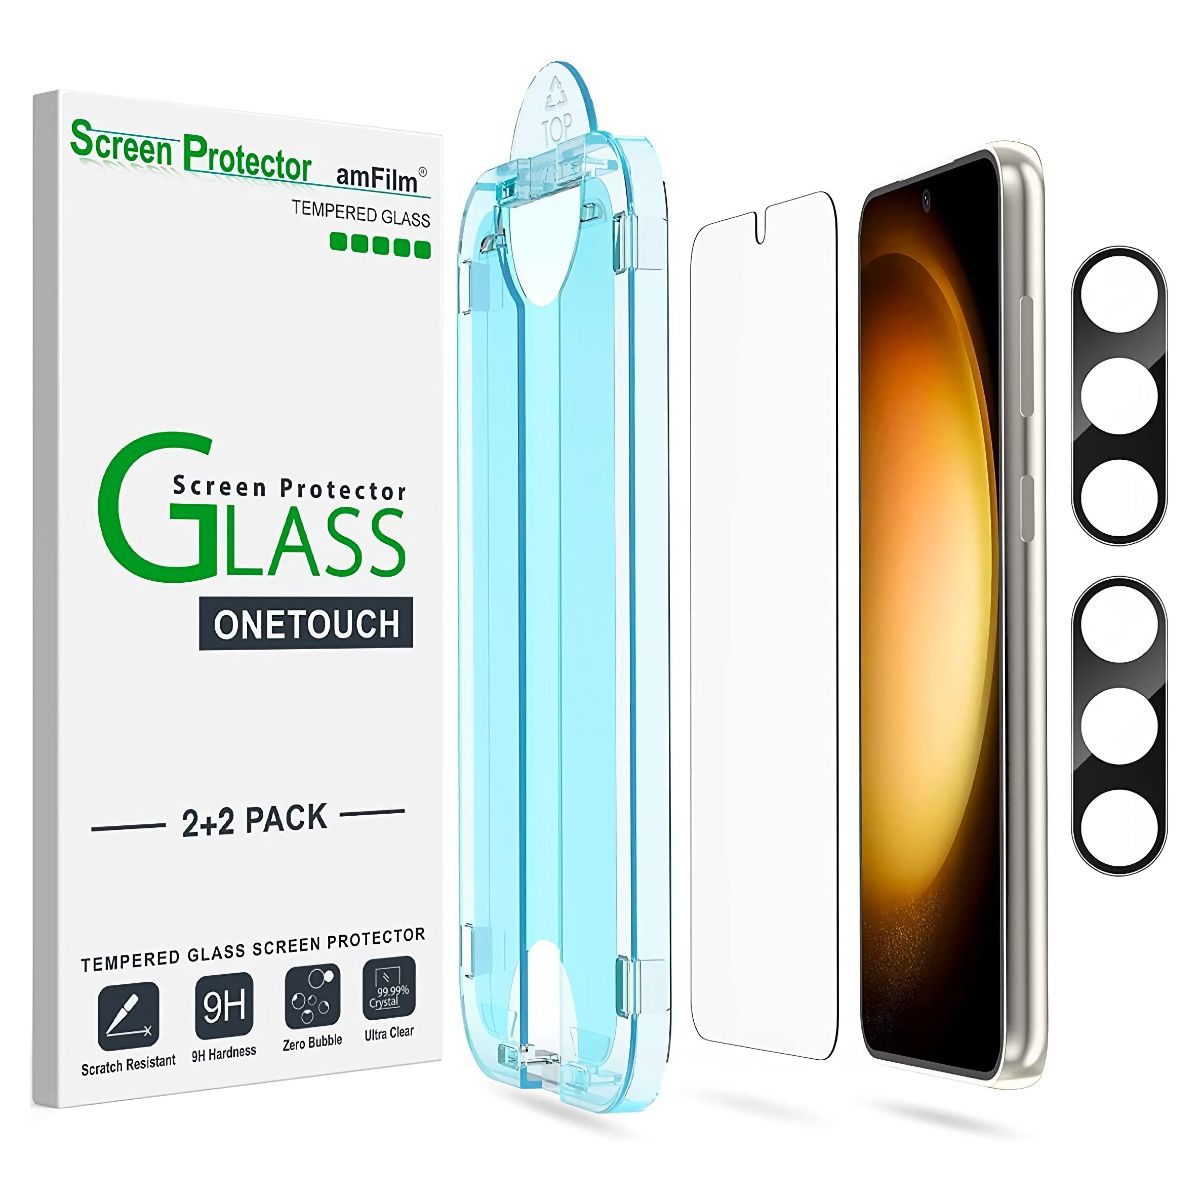 amFilm Tempered Glass Screen Protector for Galaxy S23 Plus.